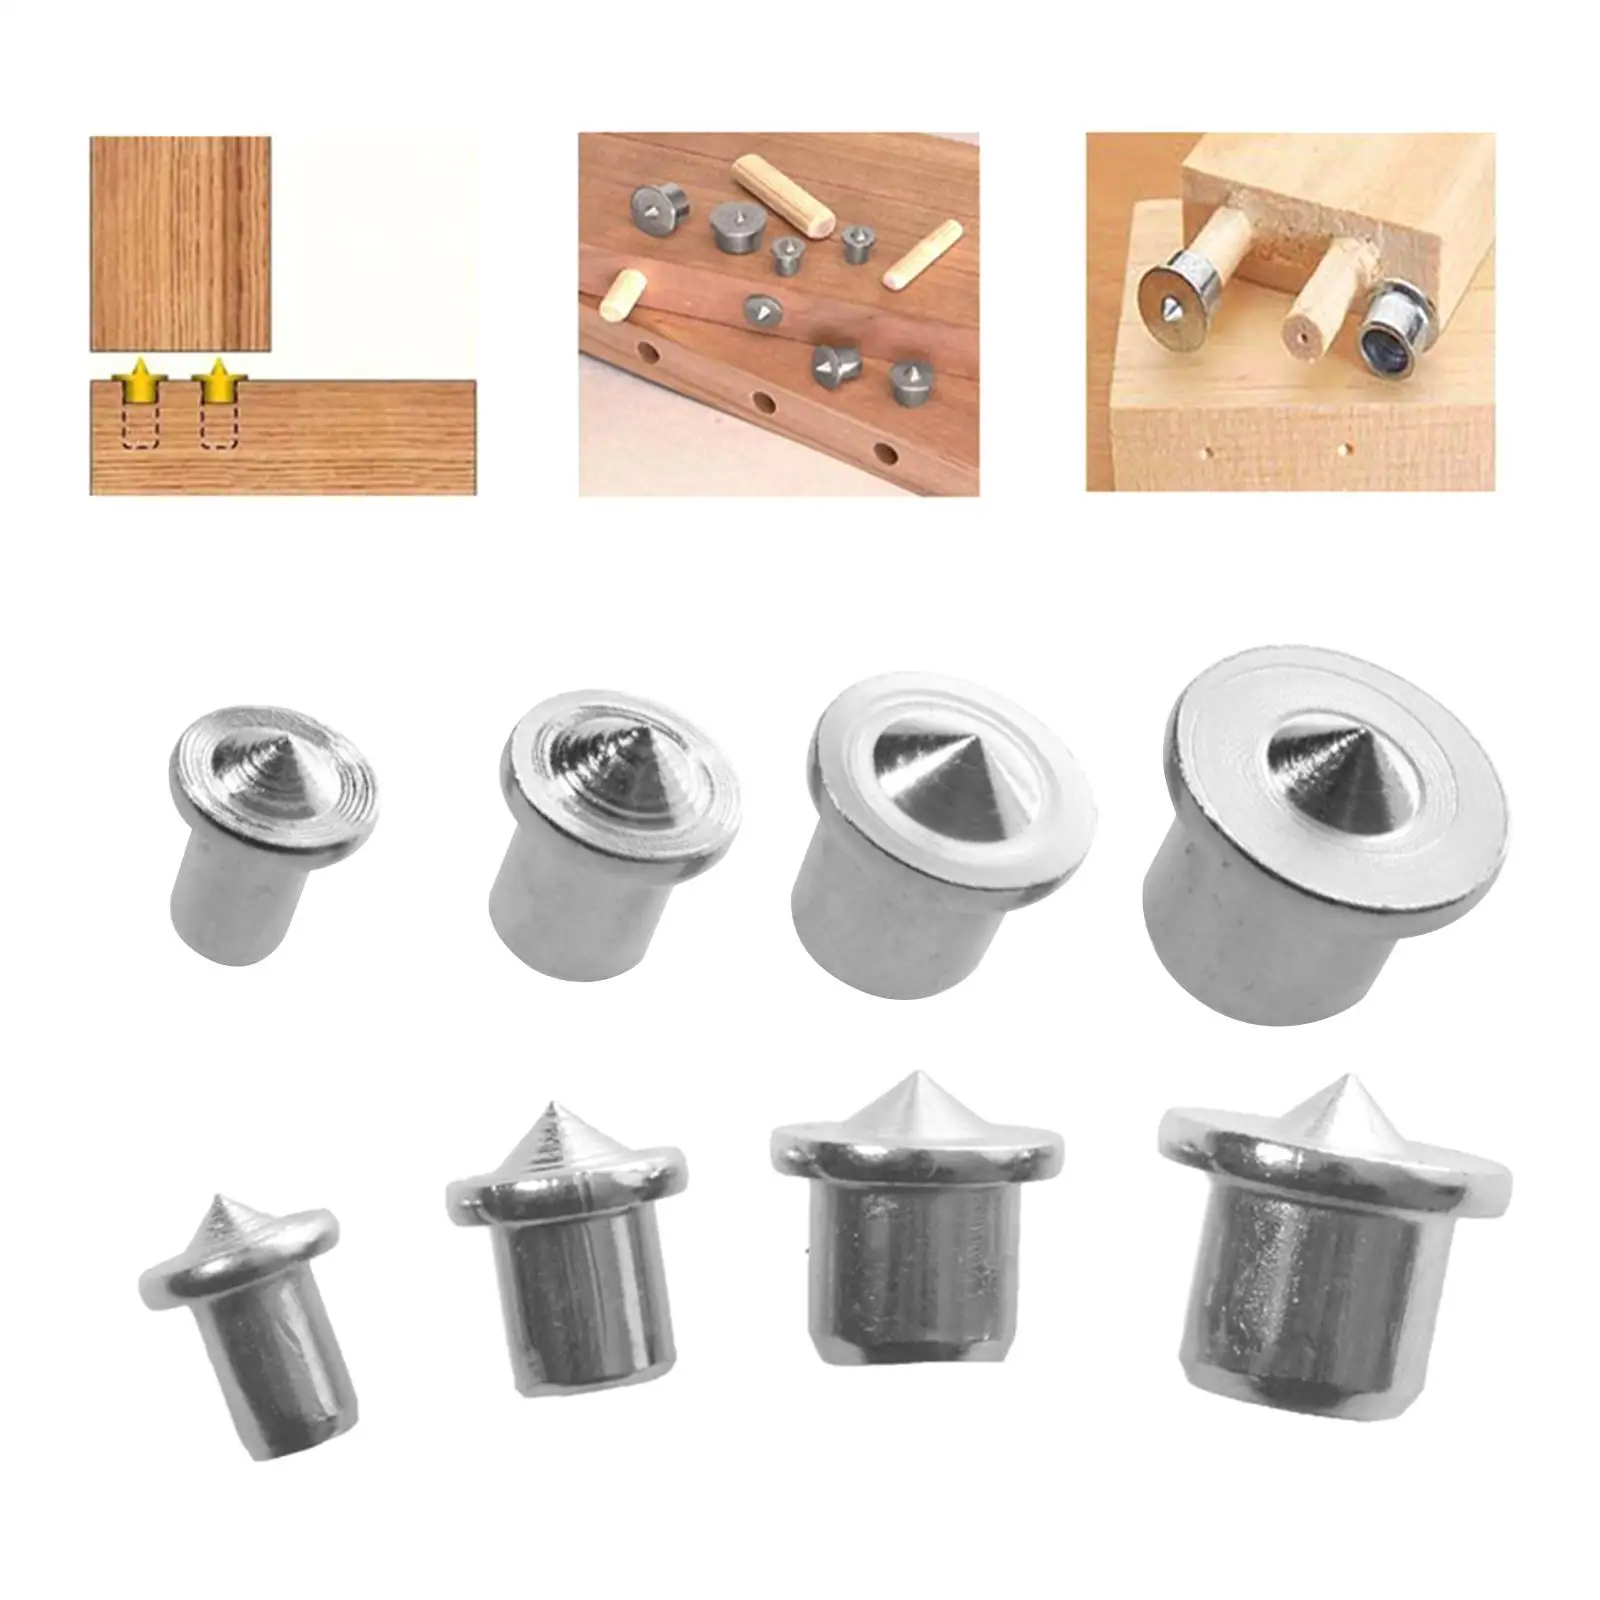 Center Dowel Pins Wooden Centering Drill Hole Tool Center Hole Positioning